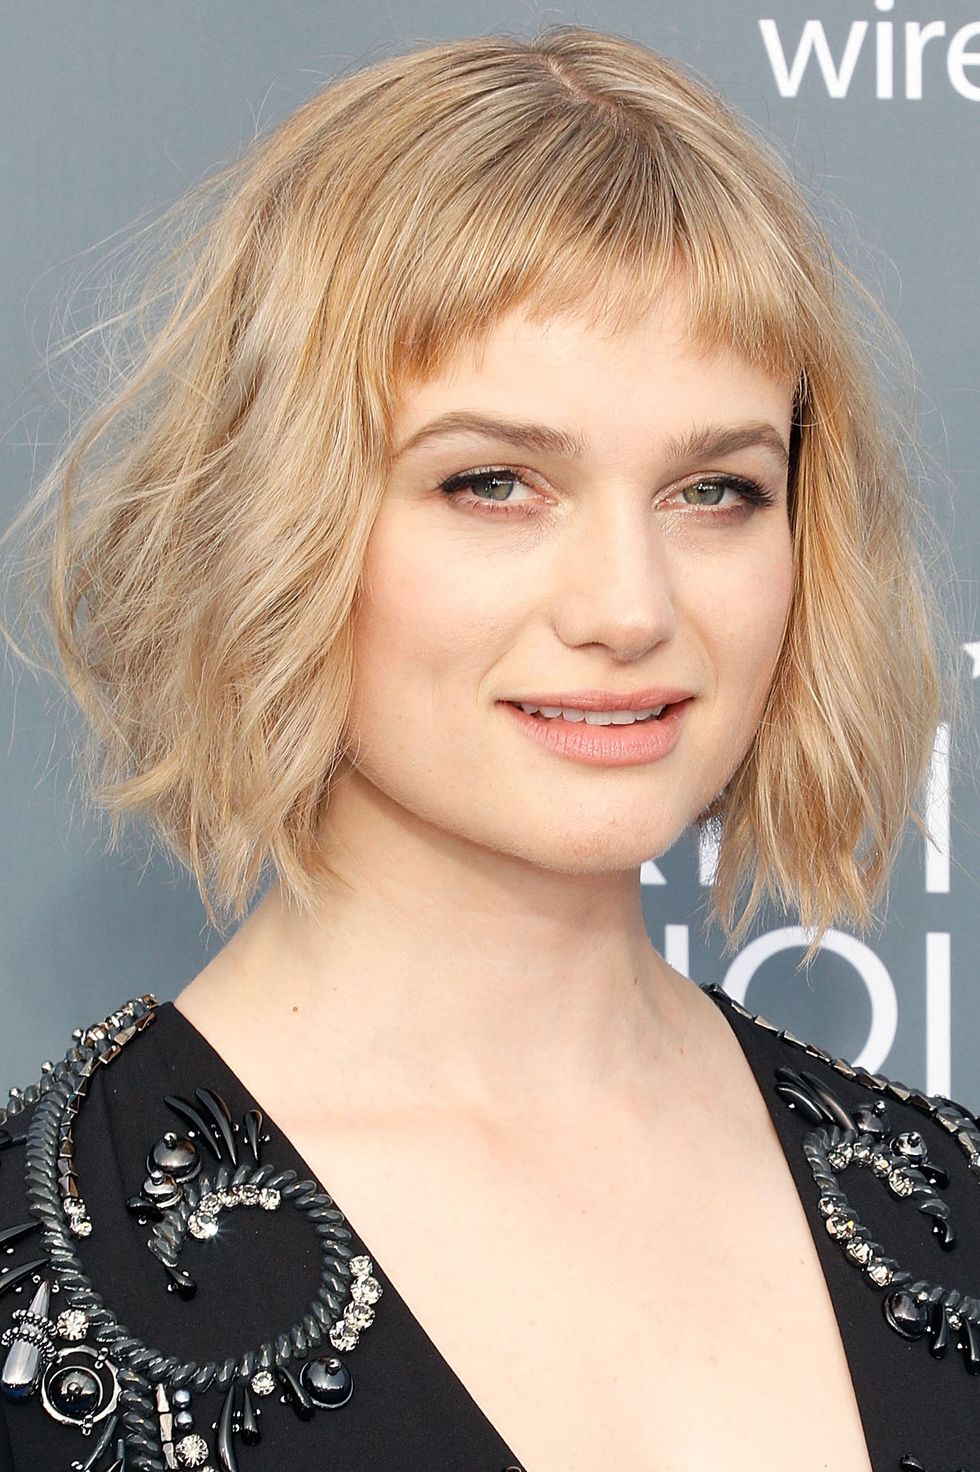 14 Best Hairstyles With Bangs to Inspire Your Next Cut - The UnderCut